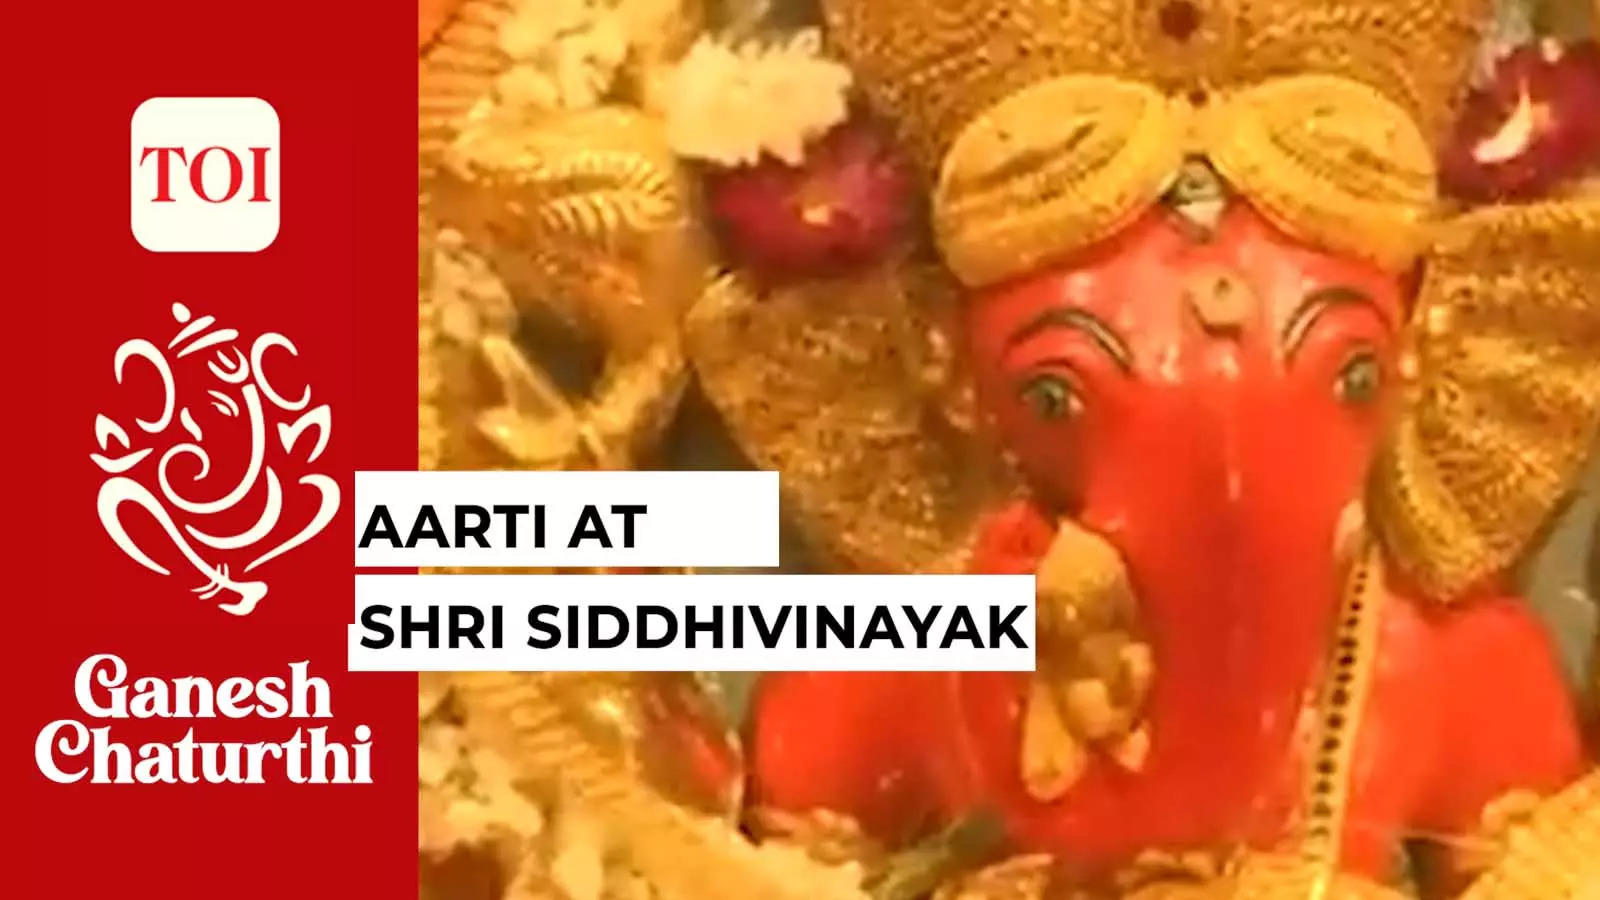 Ganesh Chaturthi: Priests perform Aarti at Shri Siddhivinayak Temple | City  - Times of India Videos